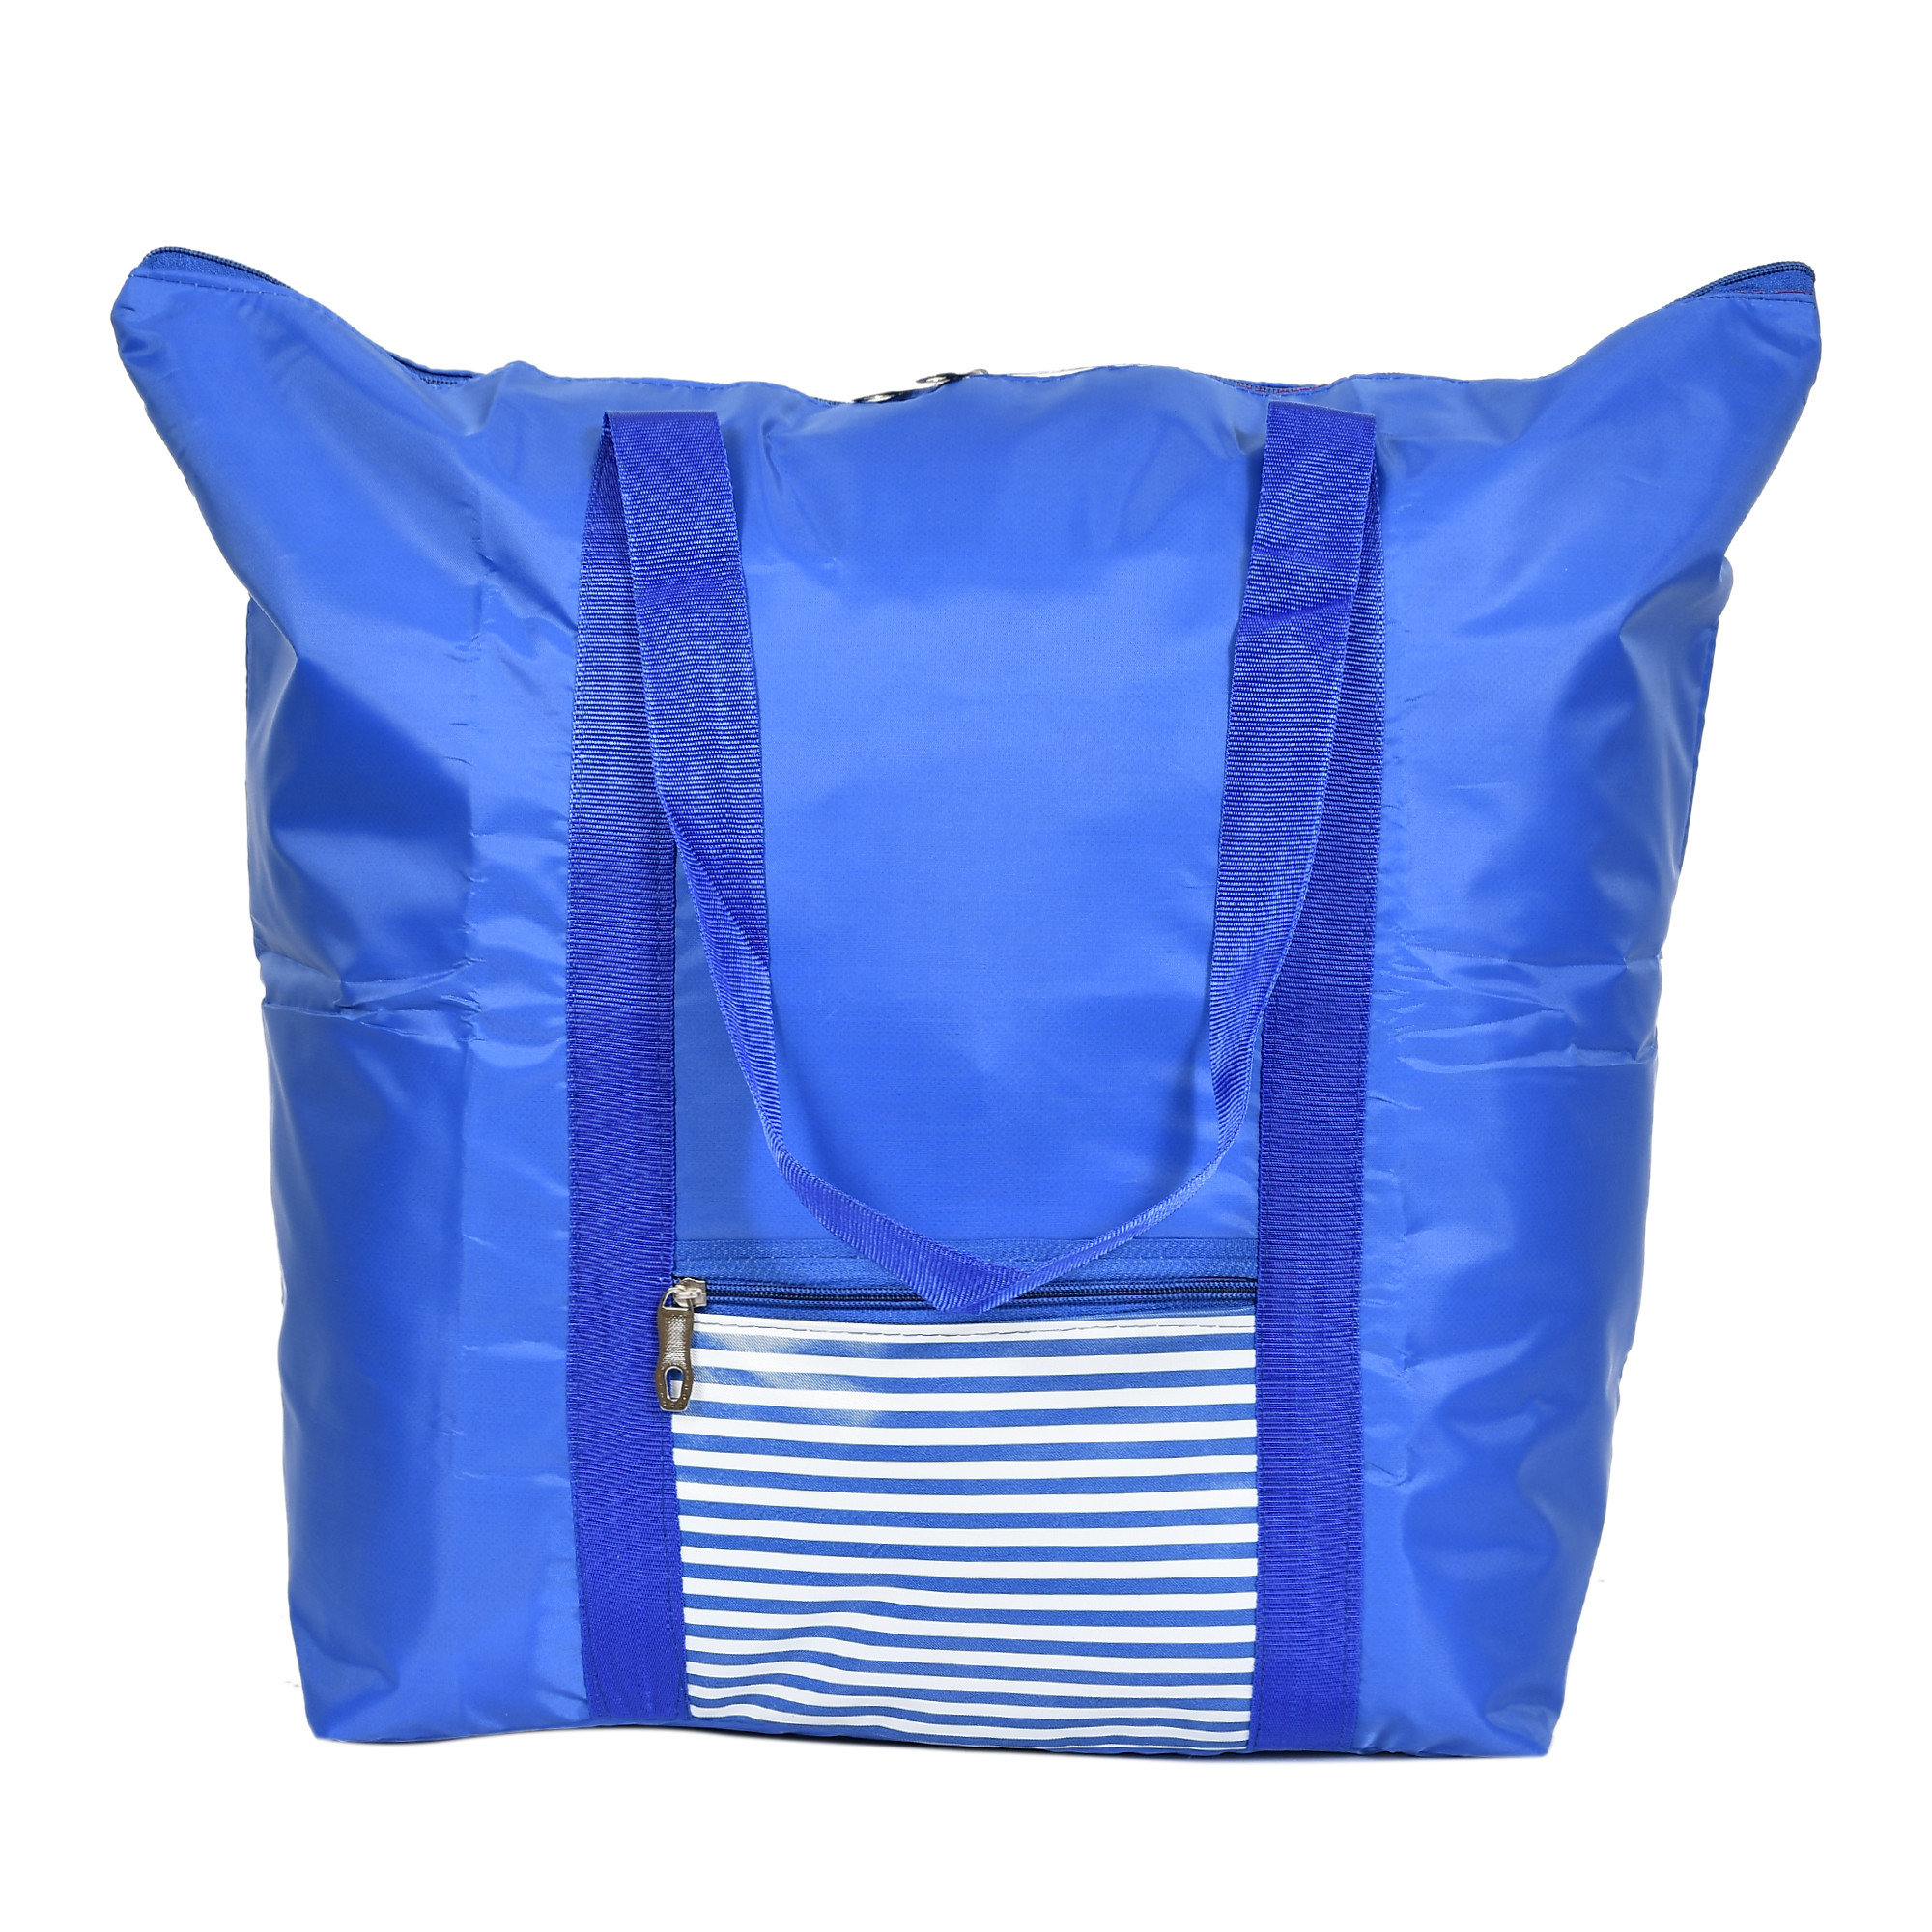 Kuber Industries Parachute Multi-Purpose Storage Bag/Clothing Storage Organizer/Toy Storage Bag/Stationery Paper Storage Bag with Zipper Closure & Strong Handle With Bag Cover (Blue)